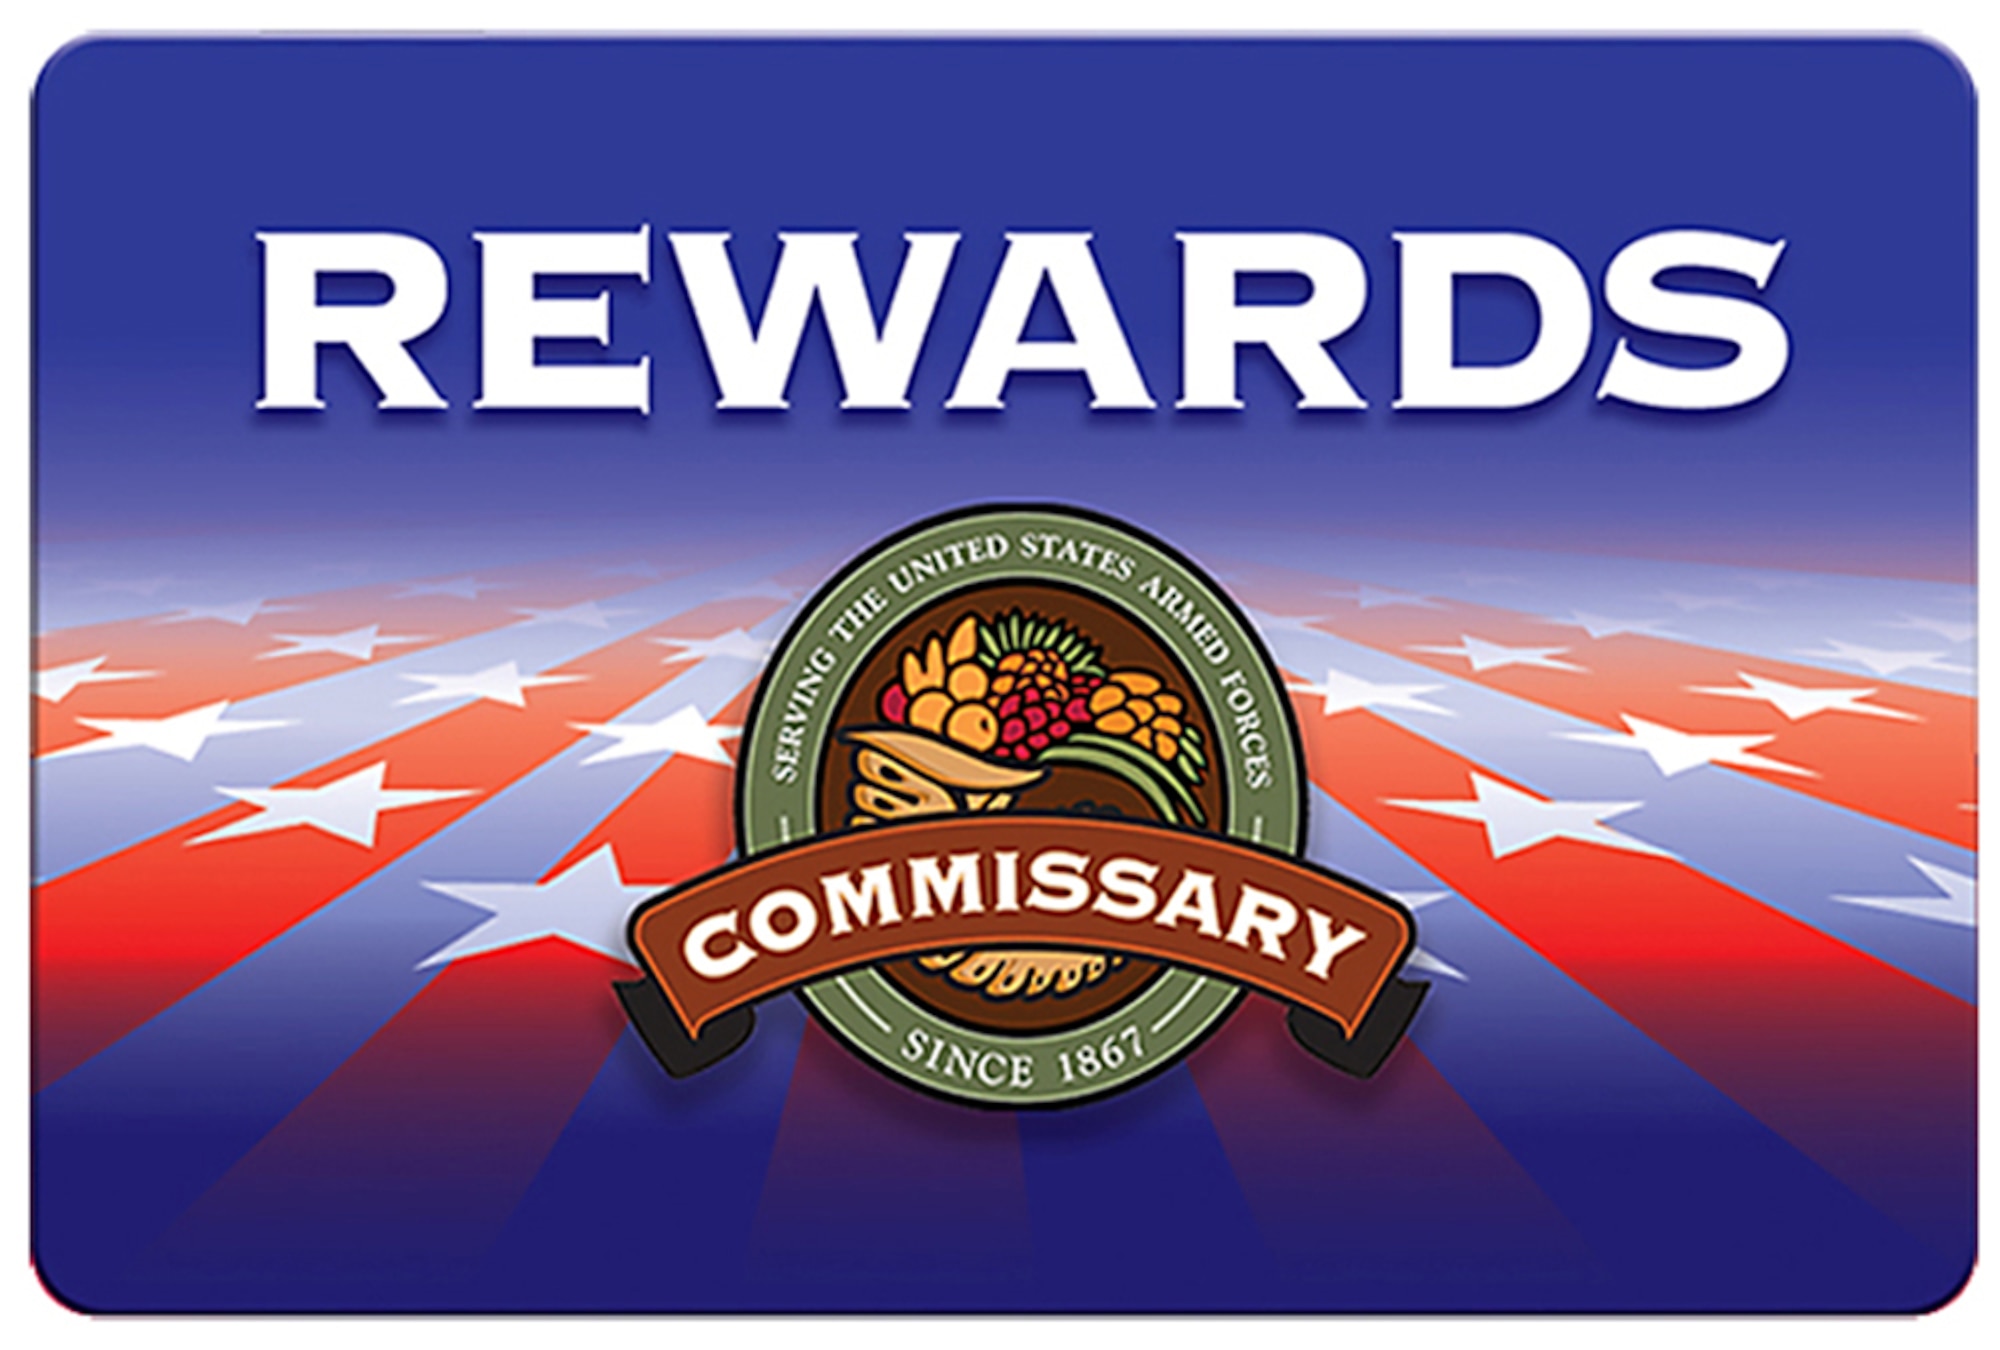 The Commissary Rewards Card is available now in the Holloman Commissary. The card is free and designed to reduce the number of paper coupons commissary customers clip and carry – saving them time and money. As an introductory offer, customers who pick up their cards by Oct. 24 receive preloaded digital coupons on their cards that can be used immediately. Adding digital coupons is easy and is done online after registering the card through the commissary website at http://www.commissaries.com/rewards/index.cfm. New digital coupons will typically become available every two or three weeks. Visit the website for more information or ask in the commissary.